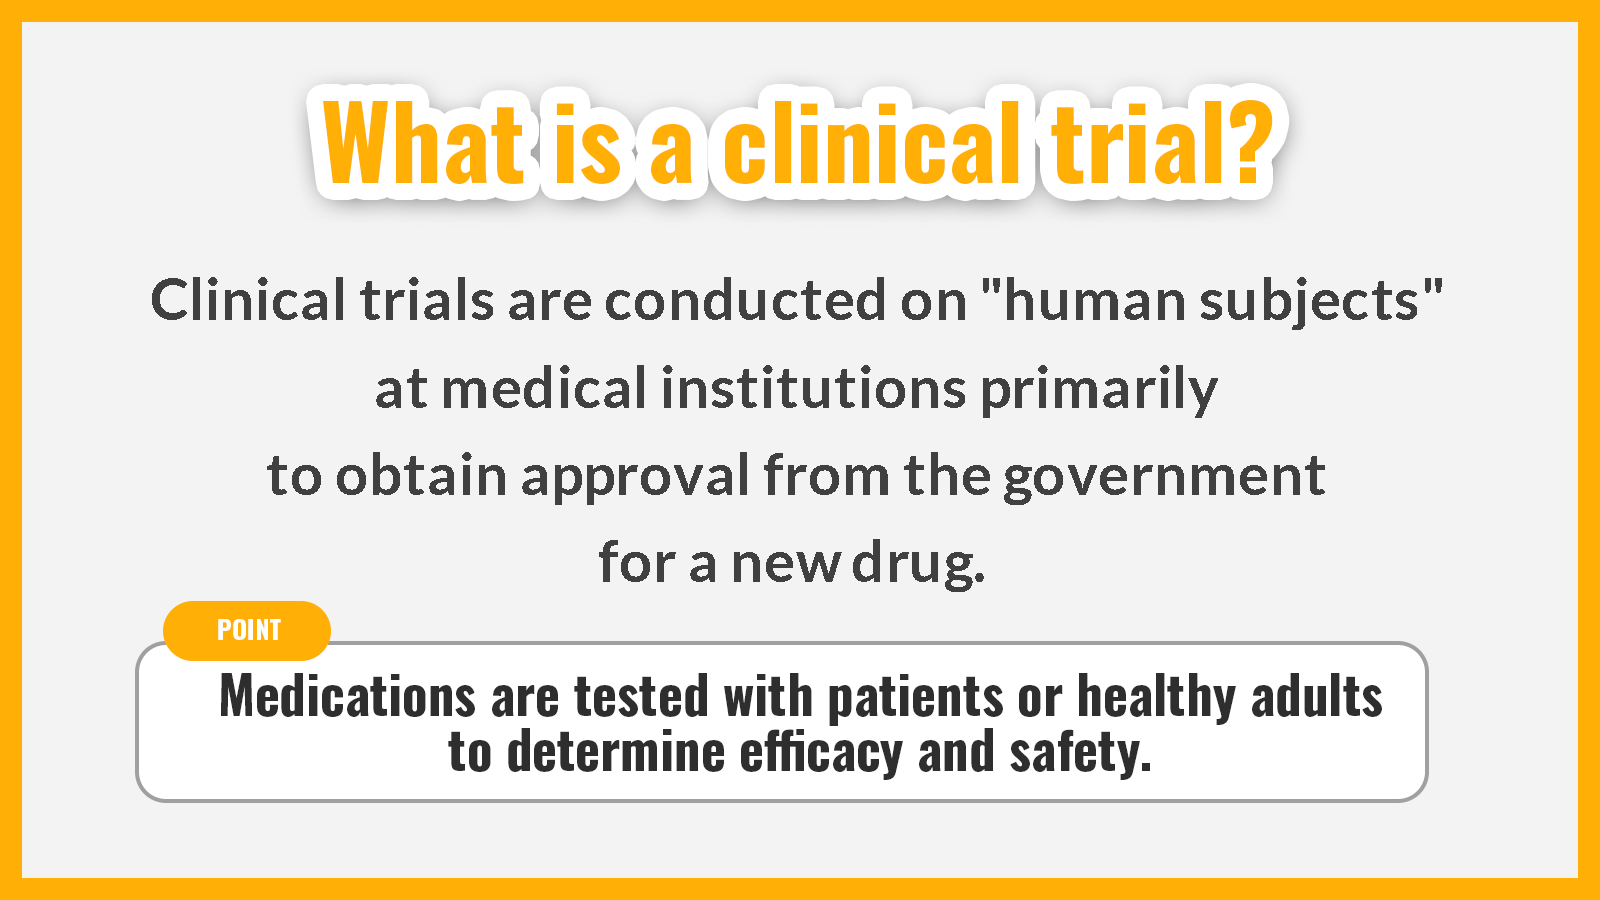 What is a clinical trial?